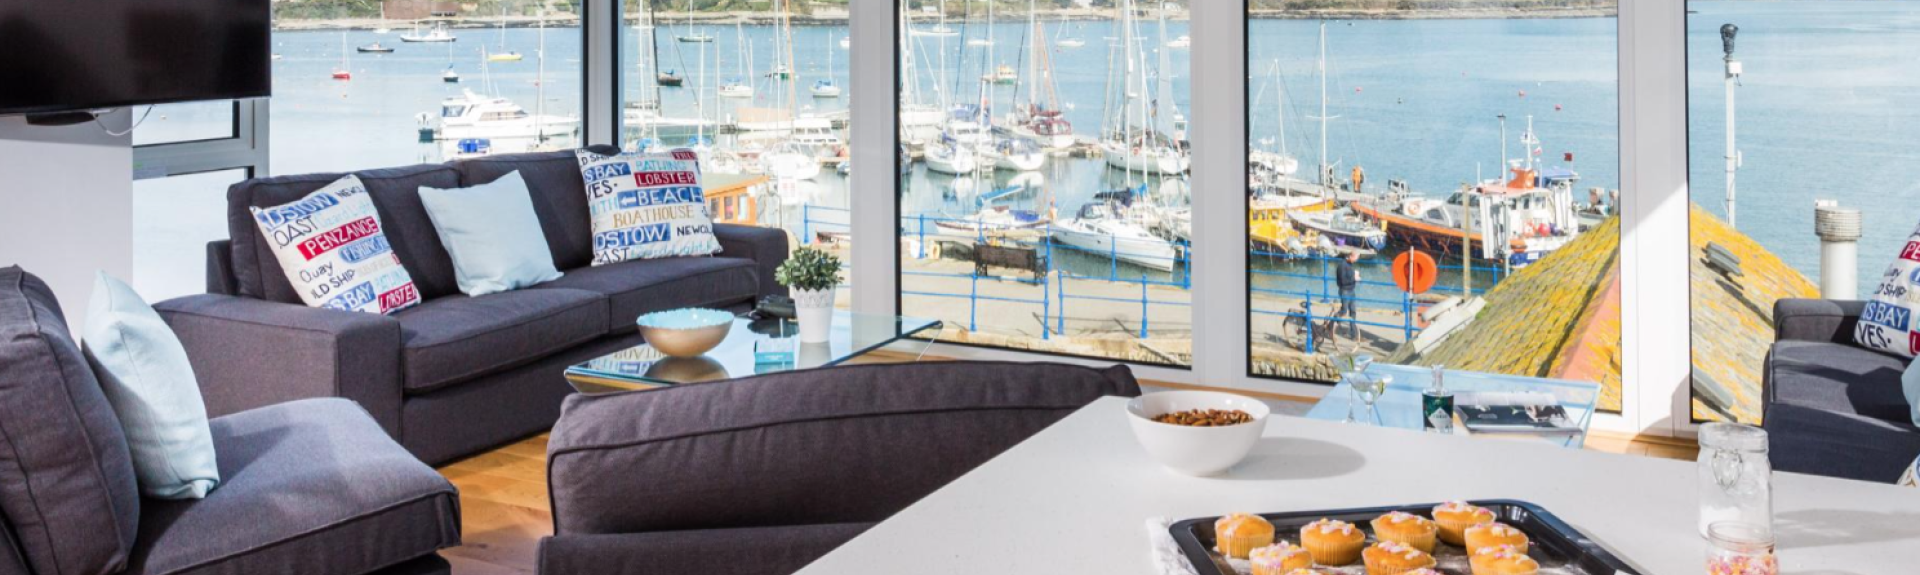 An open plan lounge with worktop and large comfortable sofas overlooks a harbourside view in Falmouth through floor-to-ceiling windows.